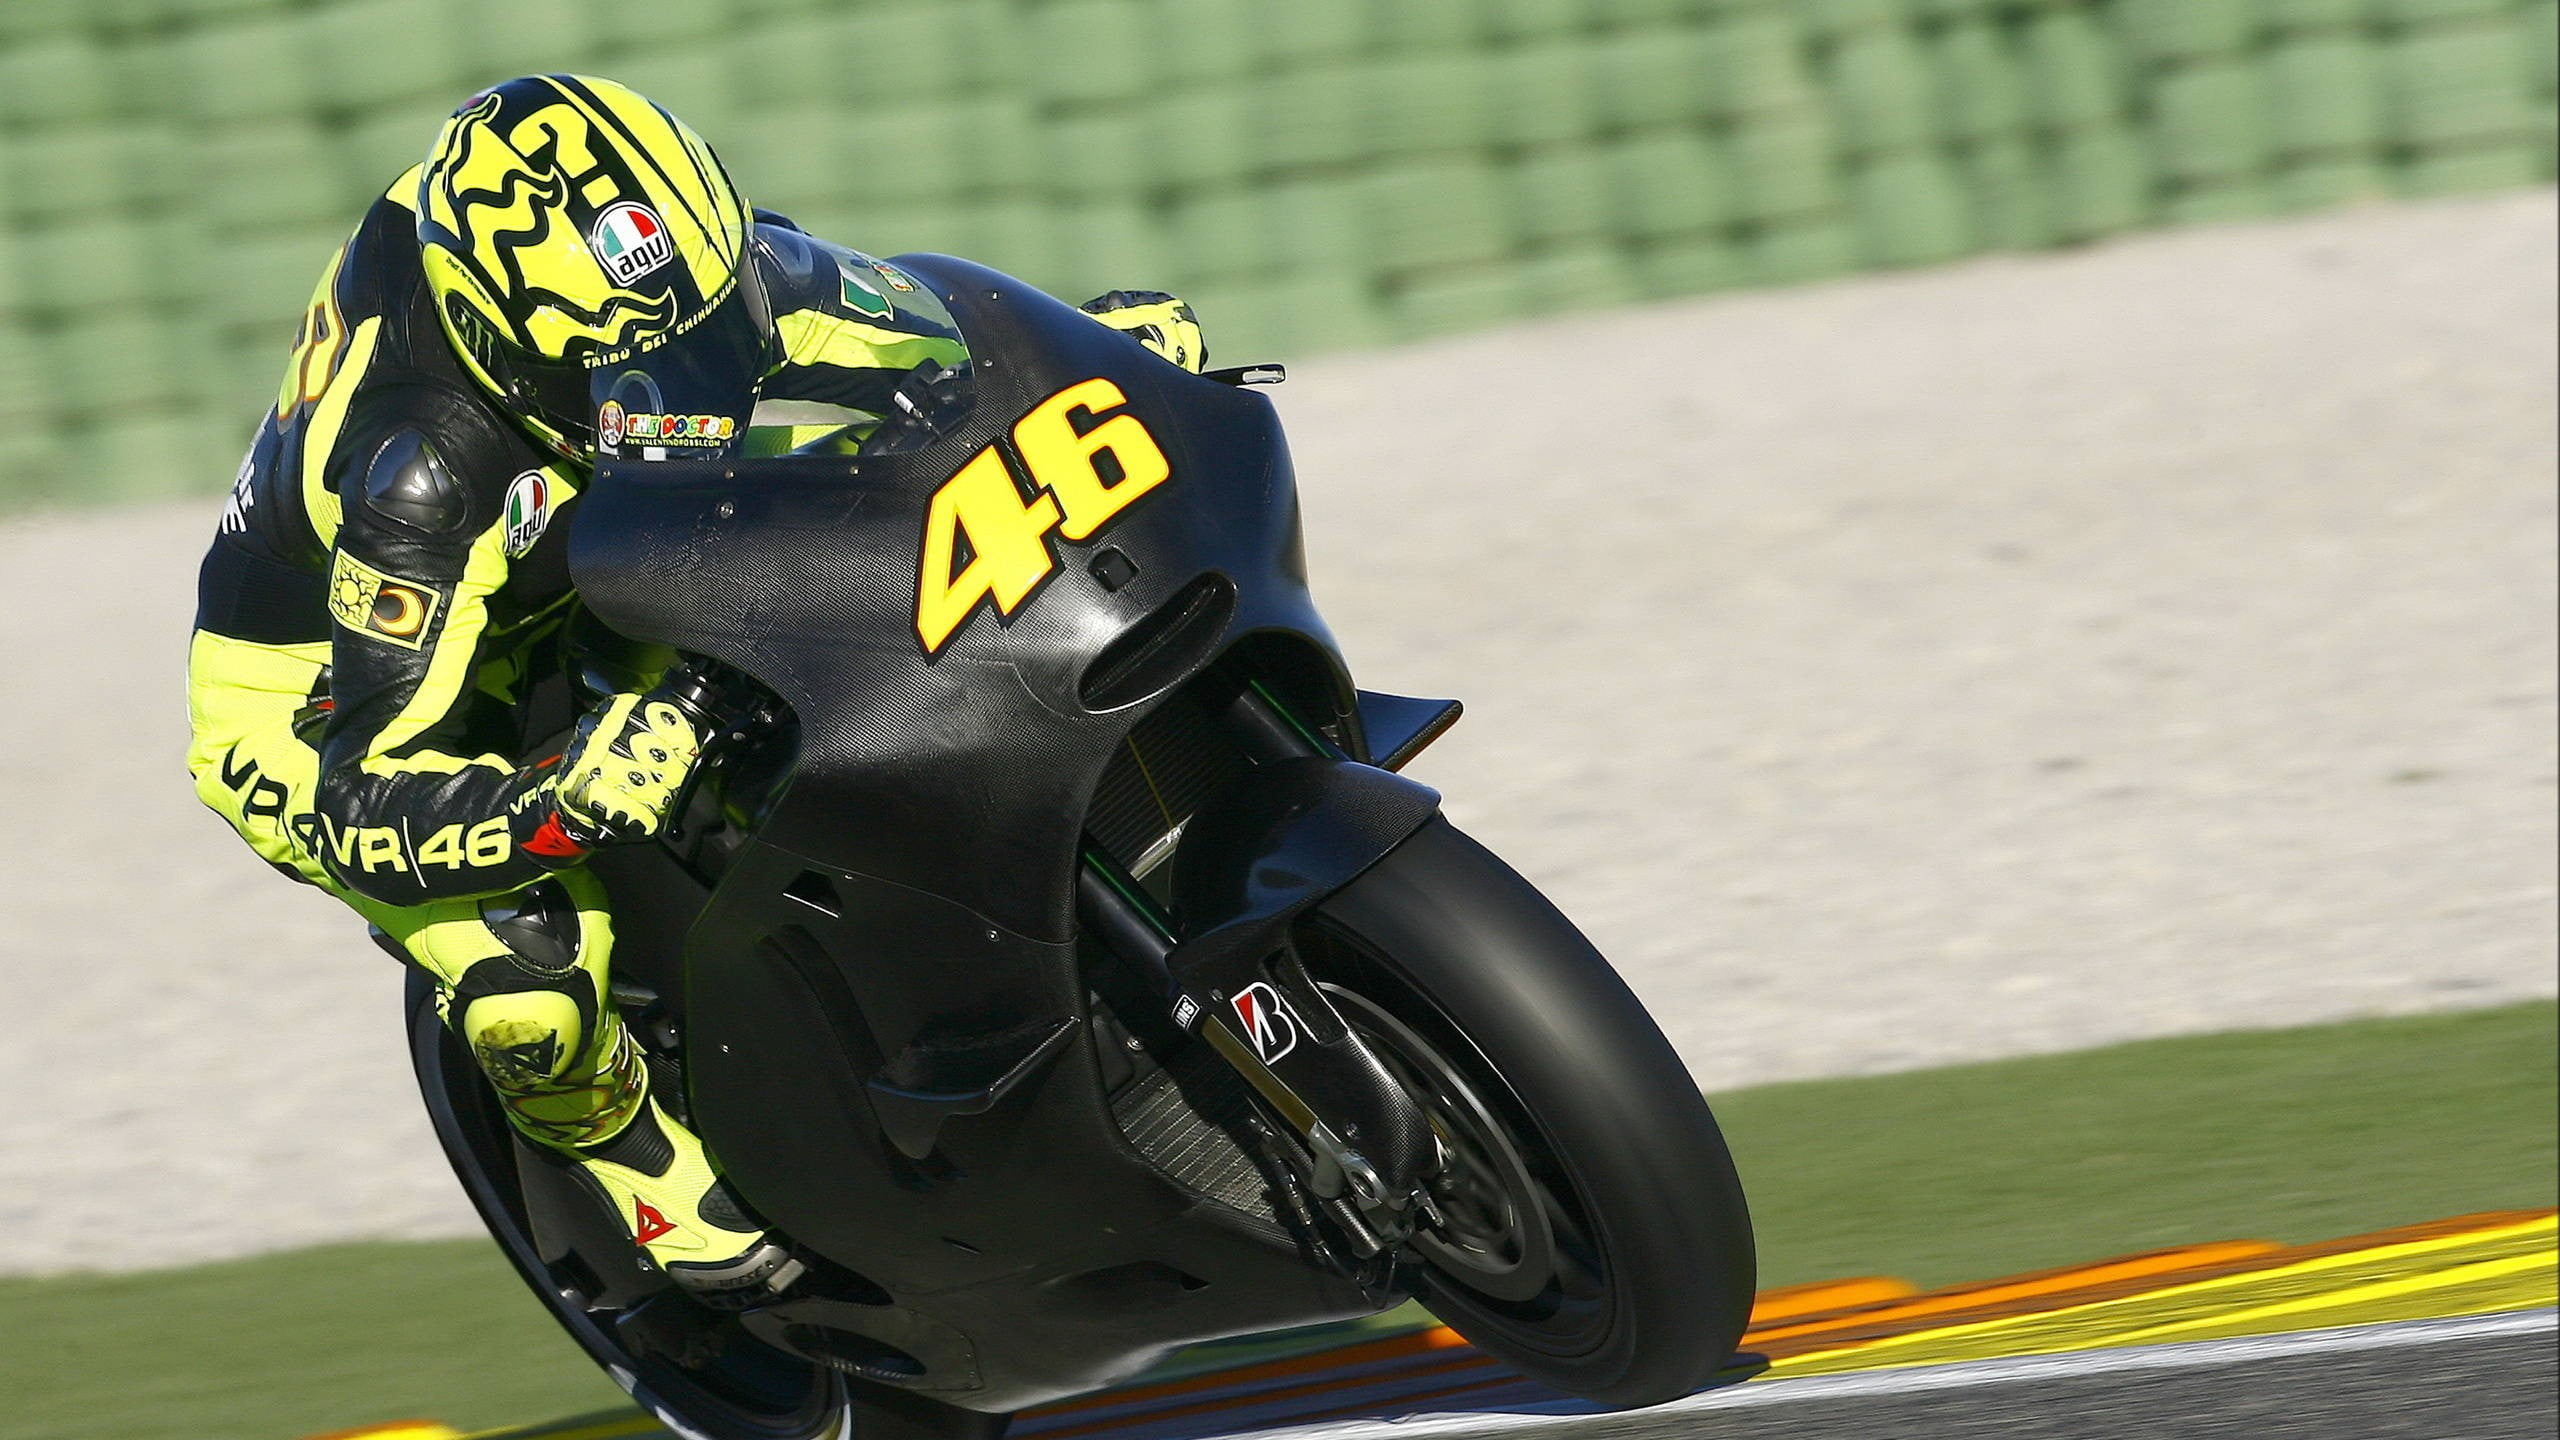 Motorcycle Racing: Valentino Rossi, Number 46, Riding His Yamaha With Black Carbon Coating. 2560x1440 HD Wallpaper.